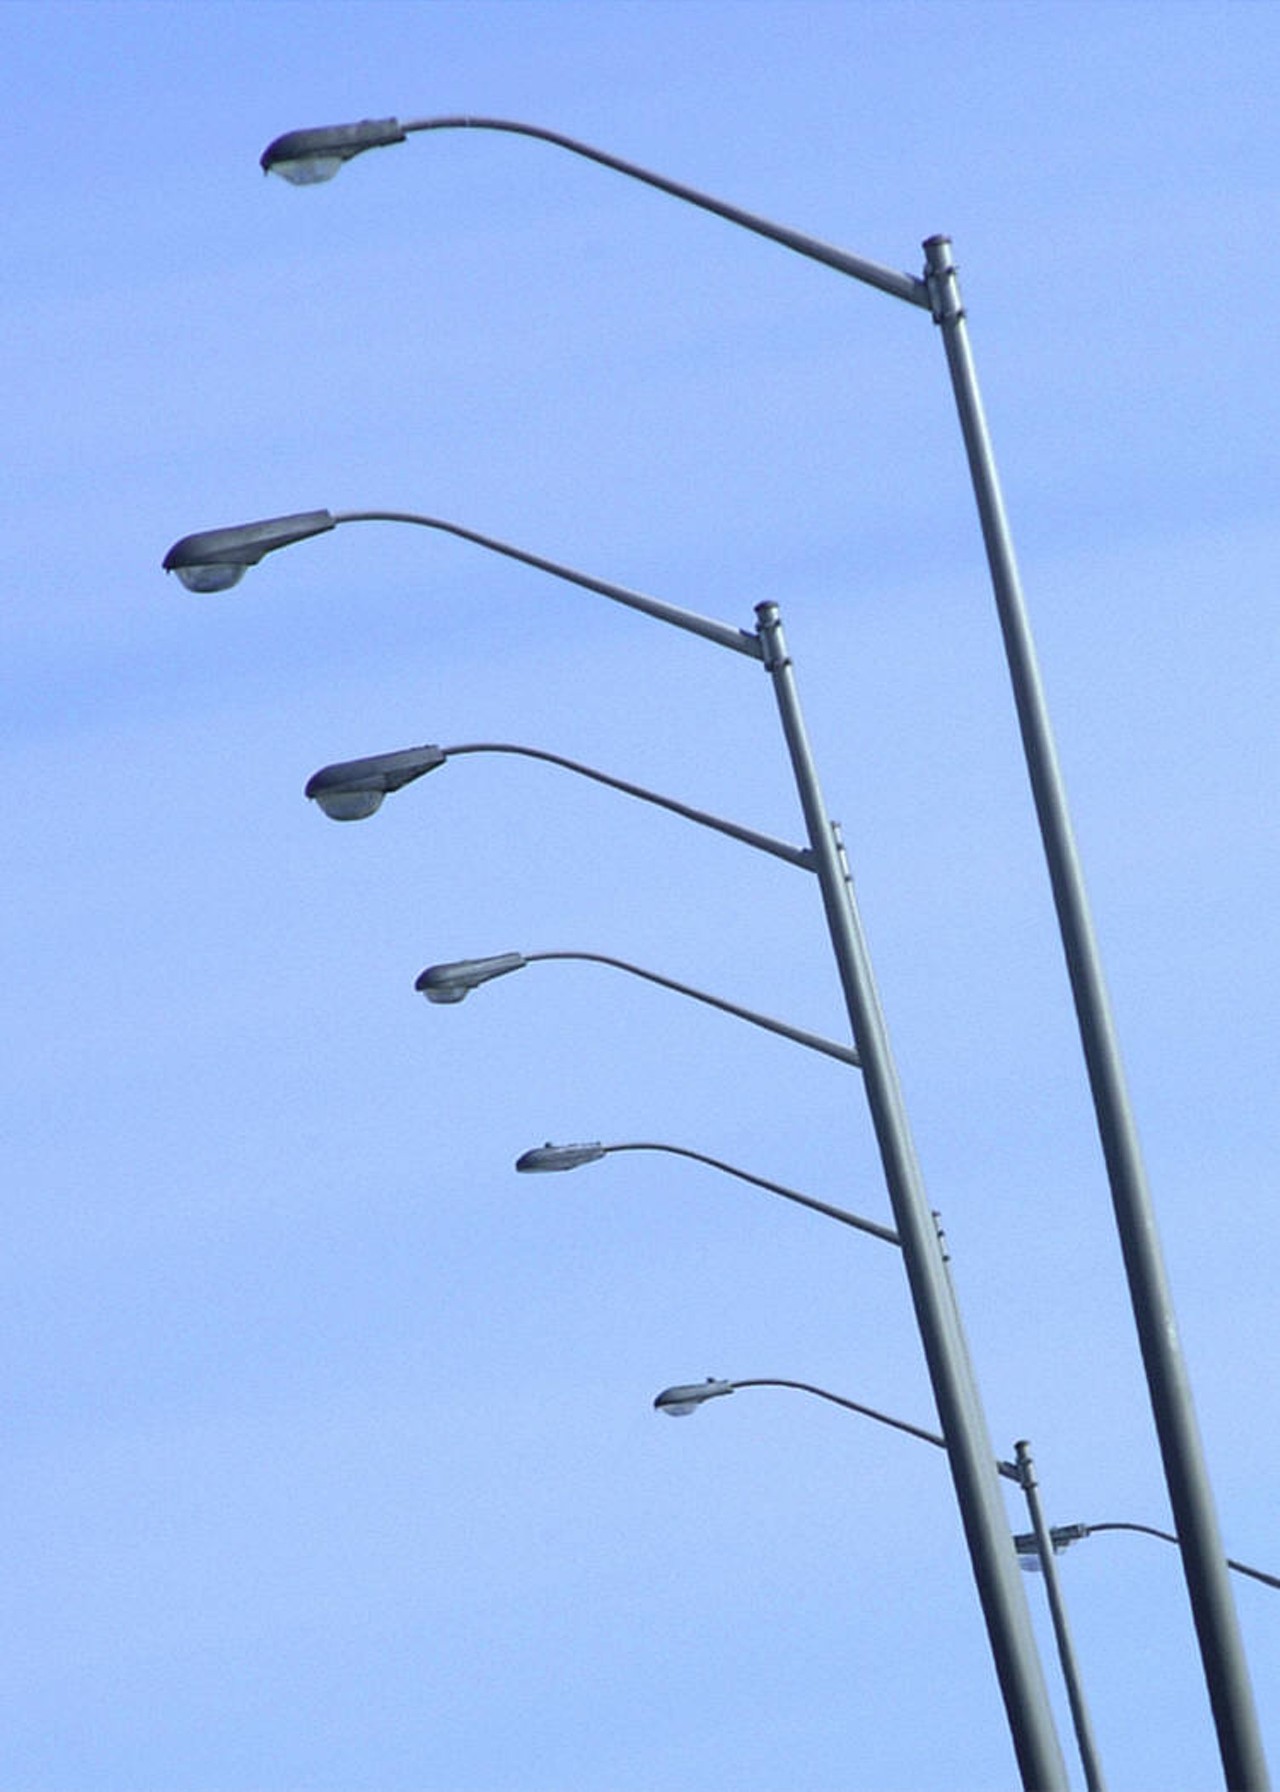 Do you like being able to see the road when you're driving at night? You can thank Charles Brush for his foresight in creating arced street lights.